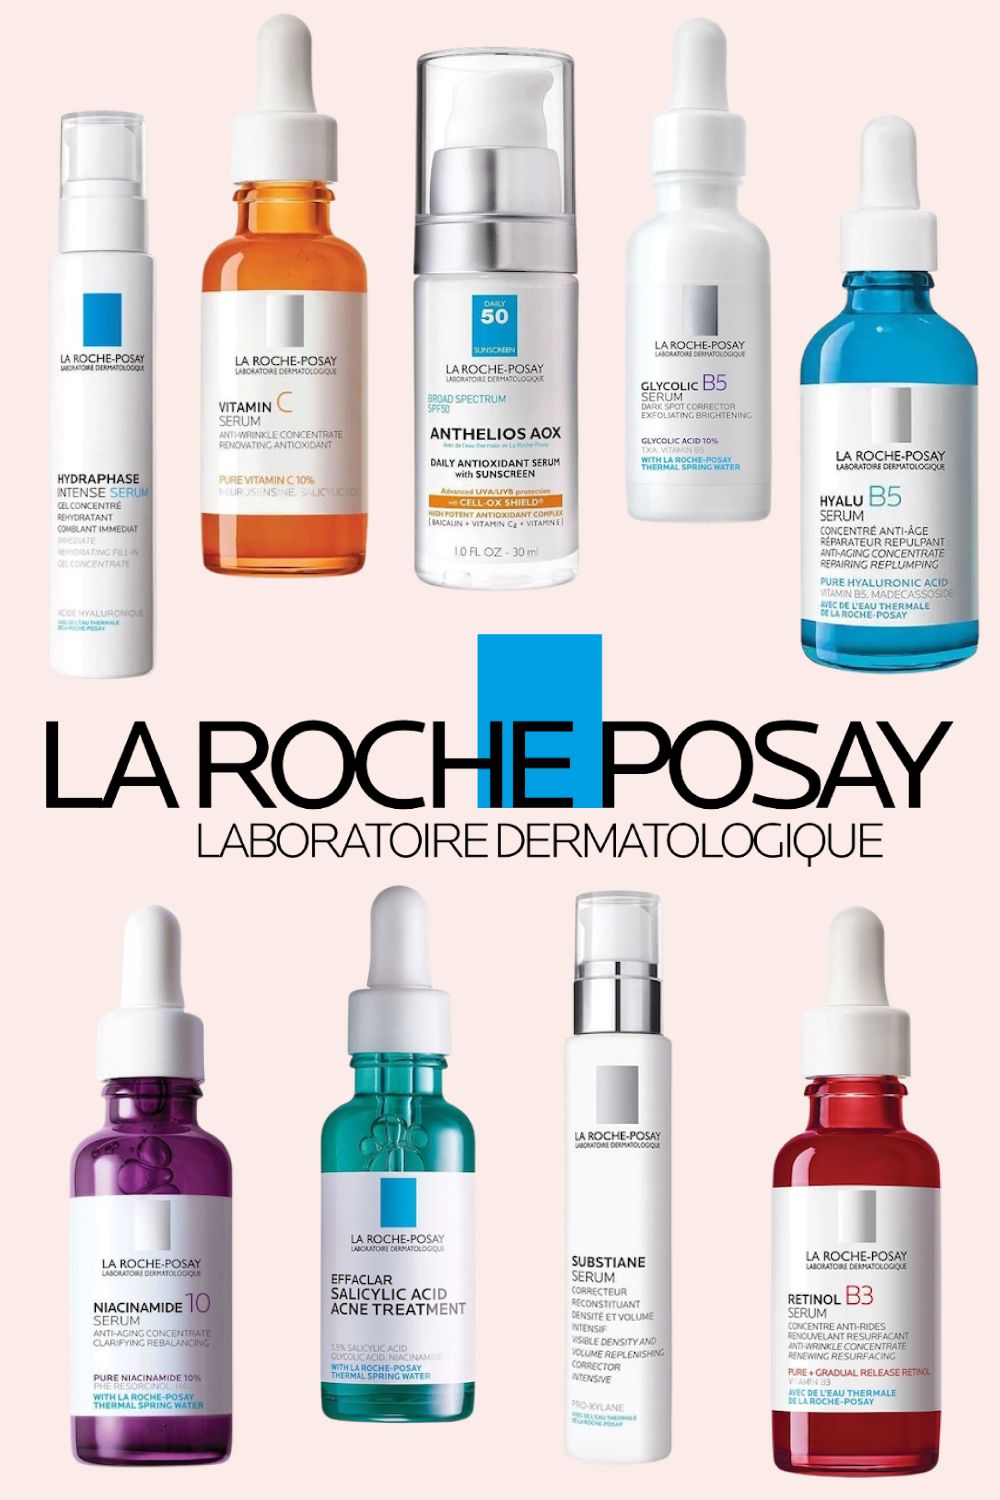 9 Best La Roche-Posay Serums that Really Work